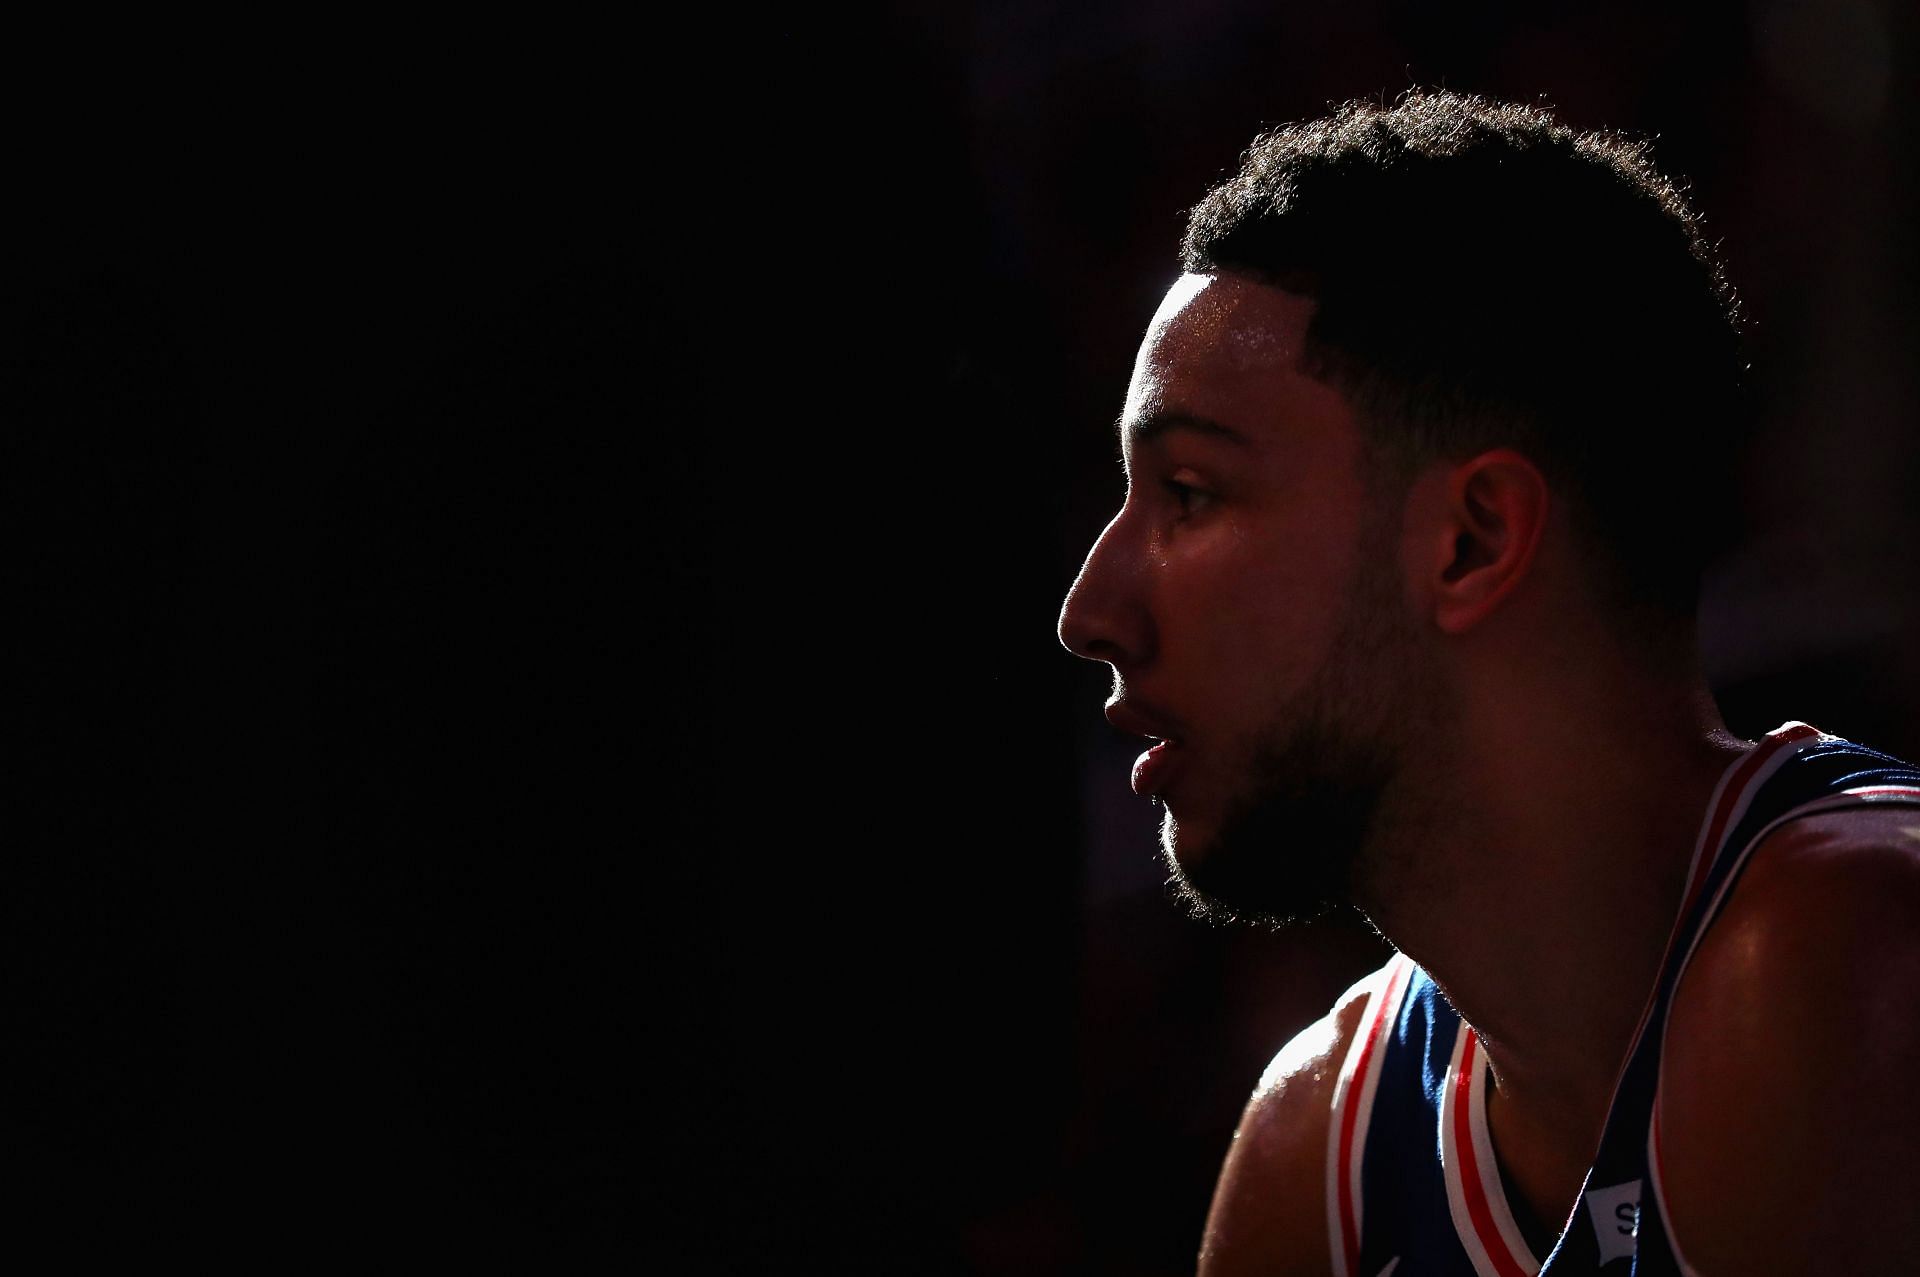 Philadelphia 76ers star Ben Simmons continues to await a possible trade.